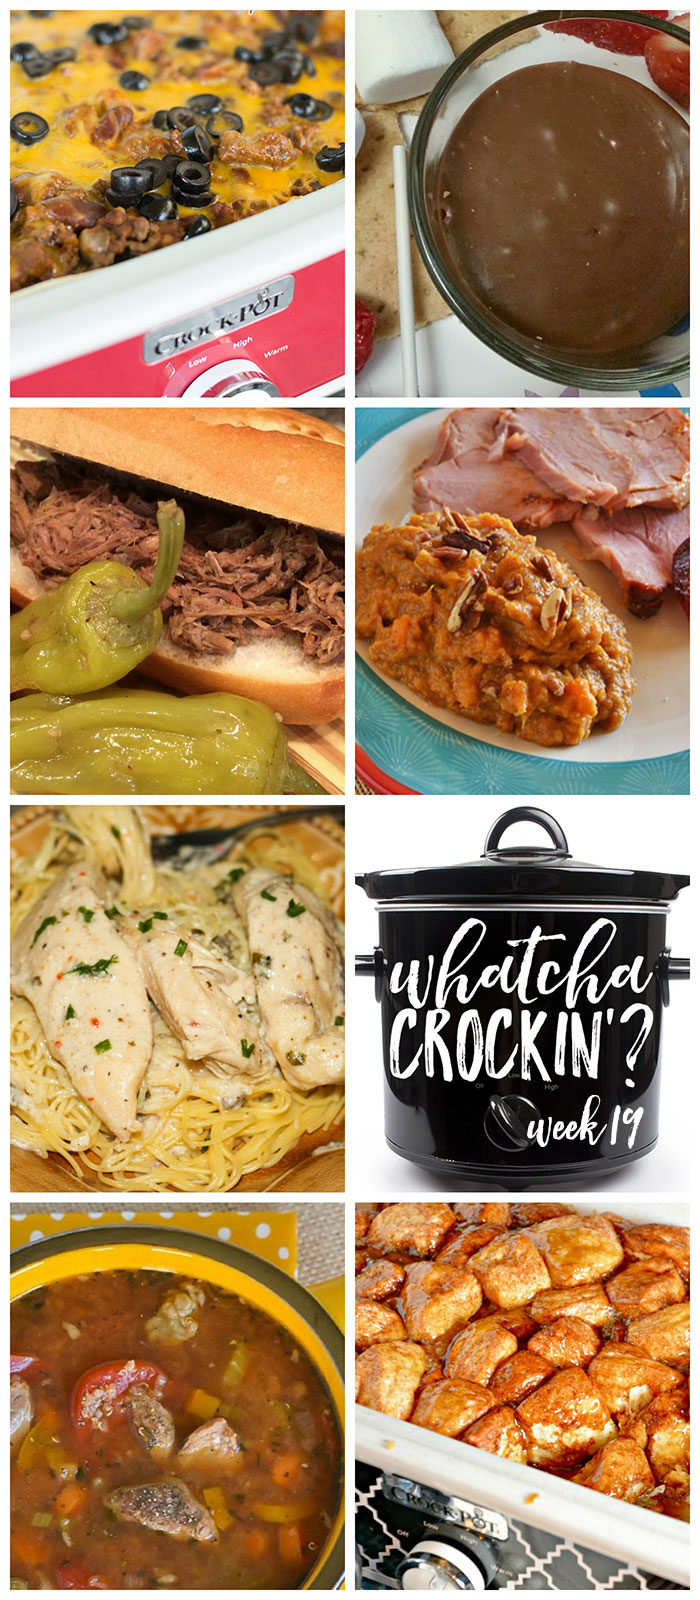 This week's Whatcha Crockin' crock pot recipes include Crock Pot Italian Beef Sandwiches, Crock Pot Chili Cheese Casserole, Slow Cooker Mashed Sweet Potatoes, Crock Pot Beef Quinoa Stew, Crock Pot Angel Chicken, Crock Pot Caramel S'Mores Fondue, Crock Pot Monkey Bread and much more!